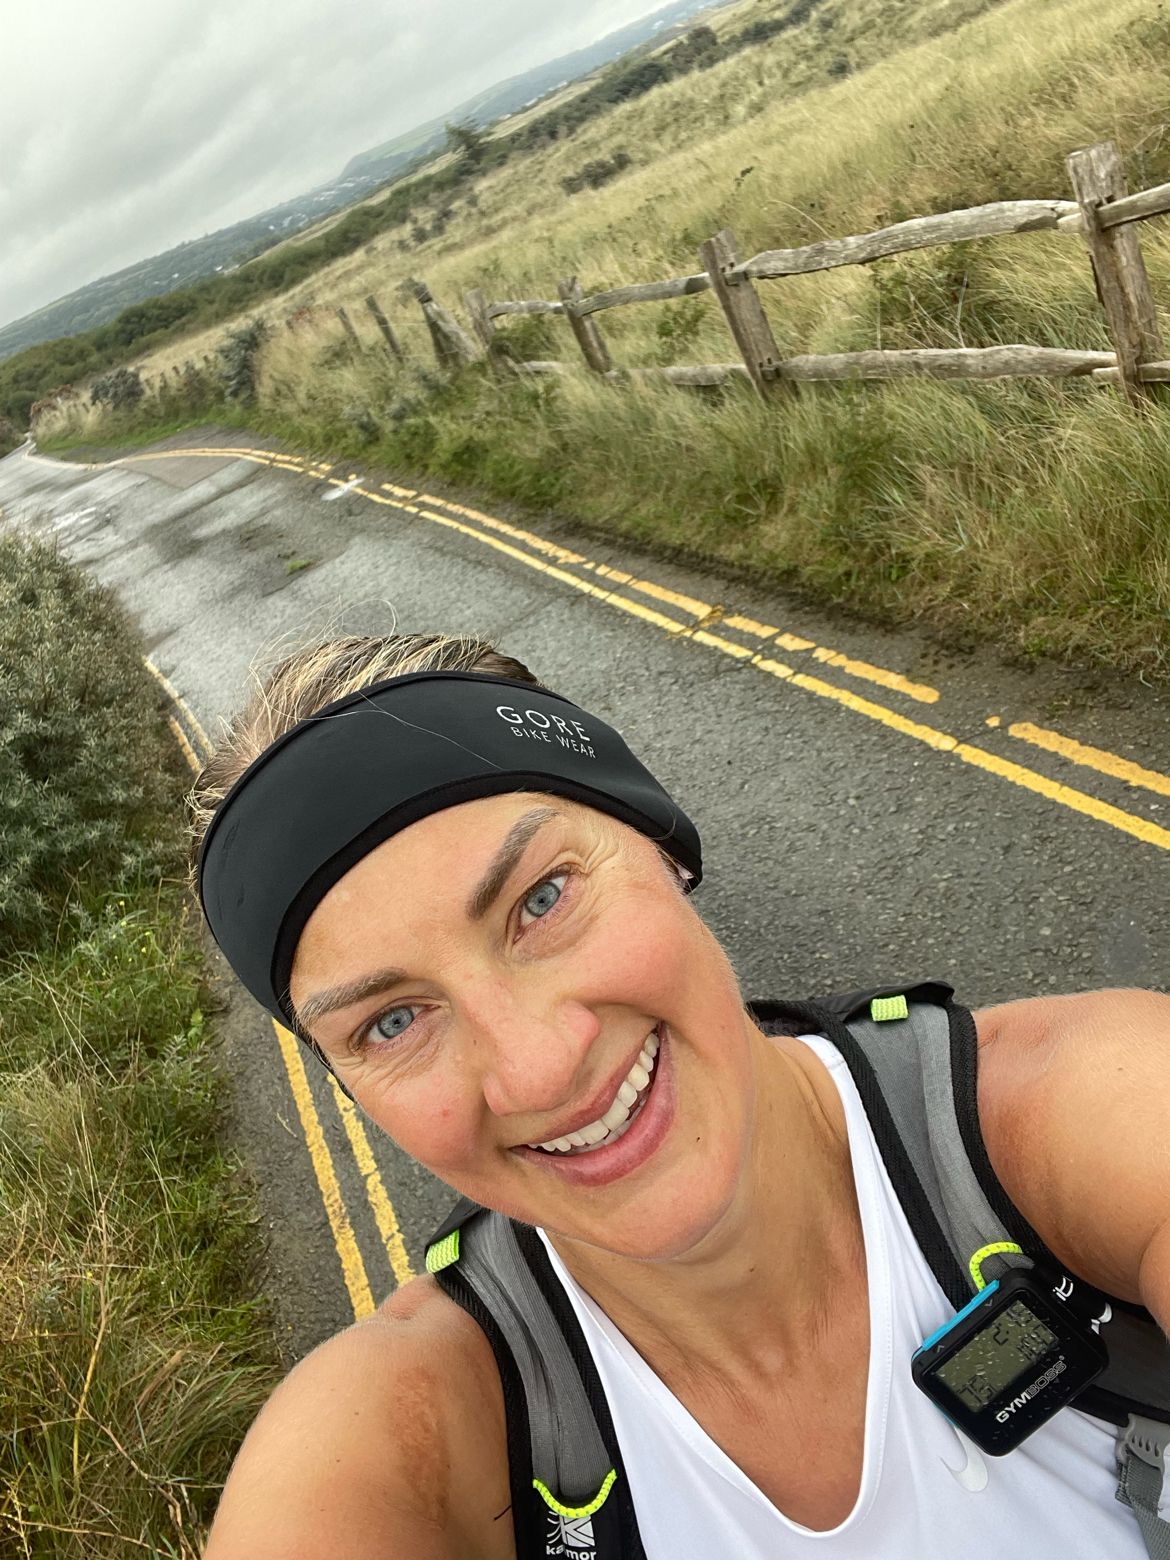 A close-up photo shows Bethan with her blonde hair tied back from her face, on a training run down a country road. Bethan is smiling at the camera. 